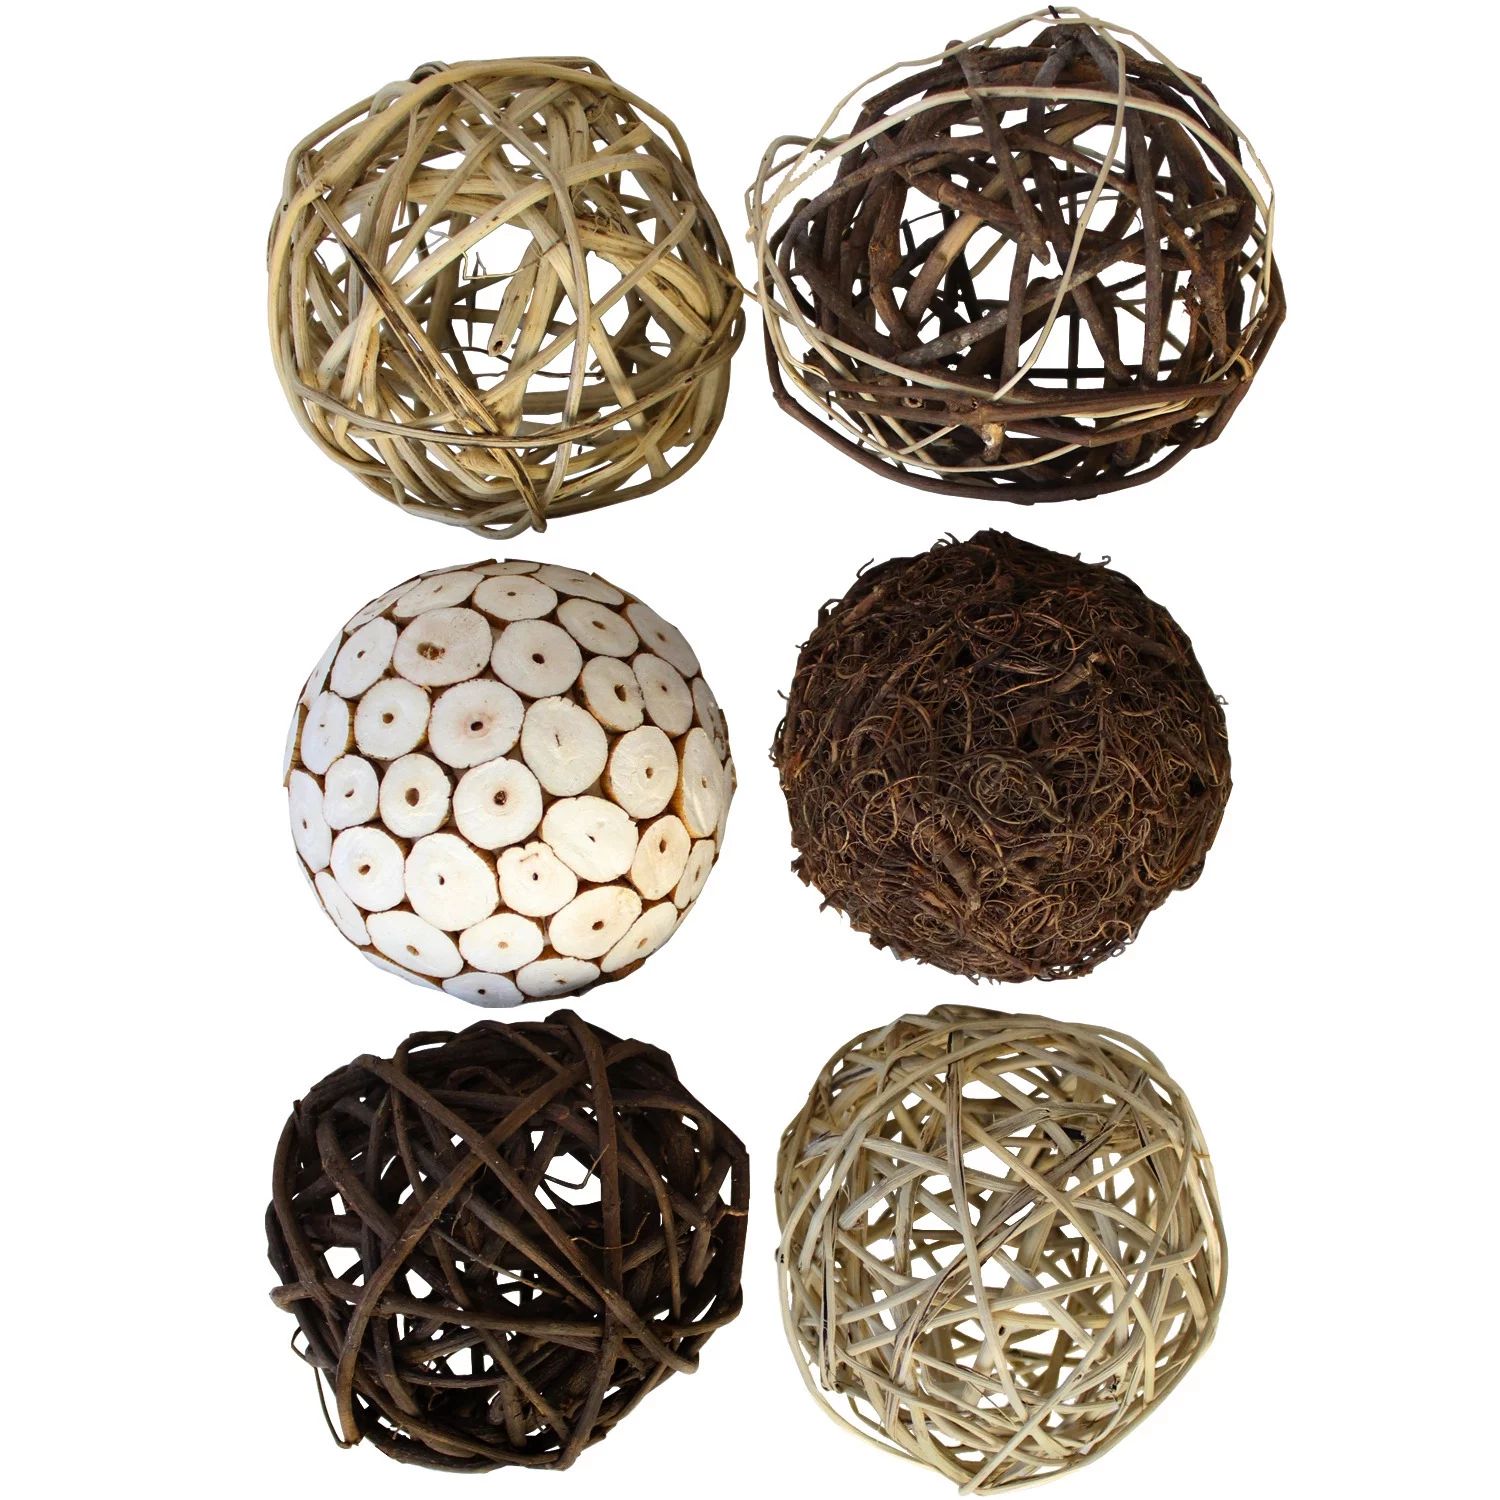 Assorted Decorative Balls for Bowls Centerpieces Bowl Fillers 6 Pack | Walmart (US)